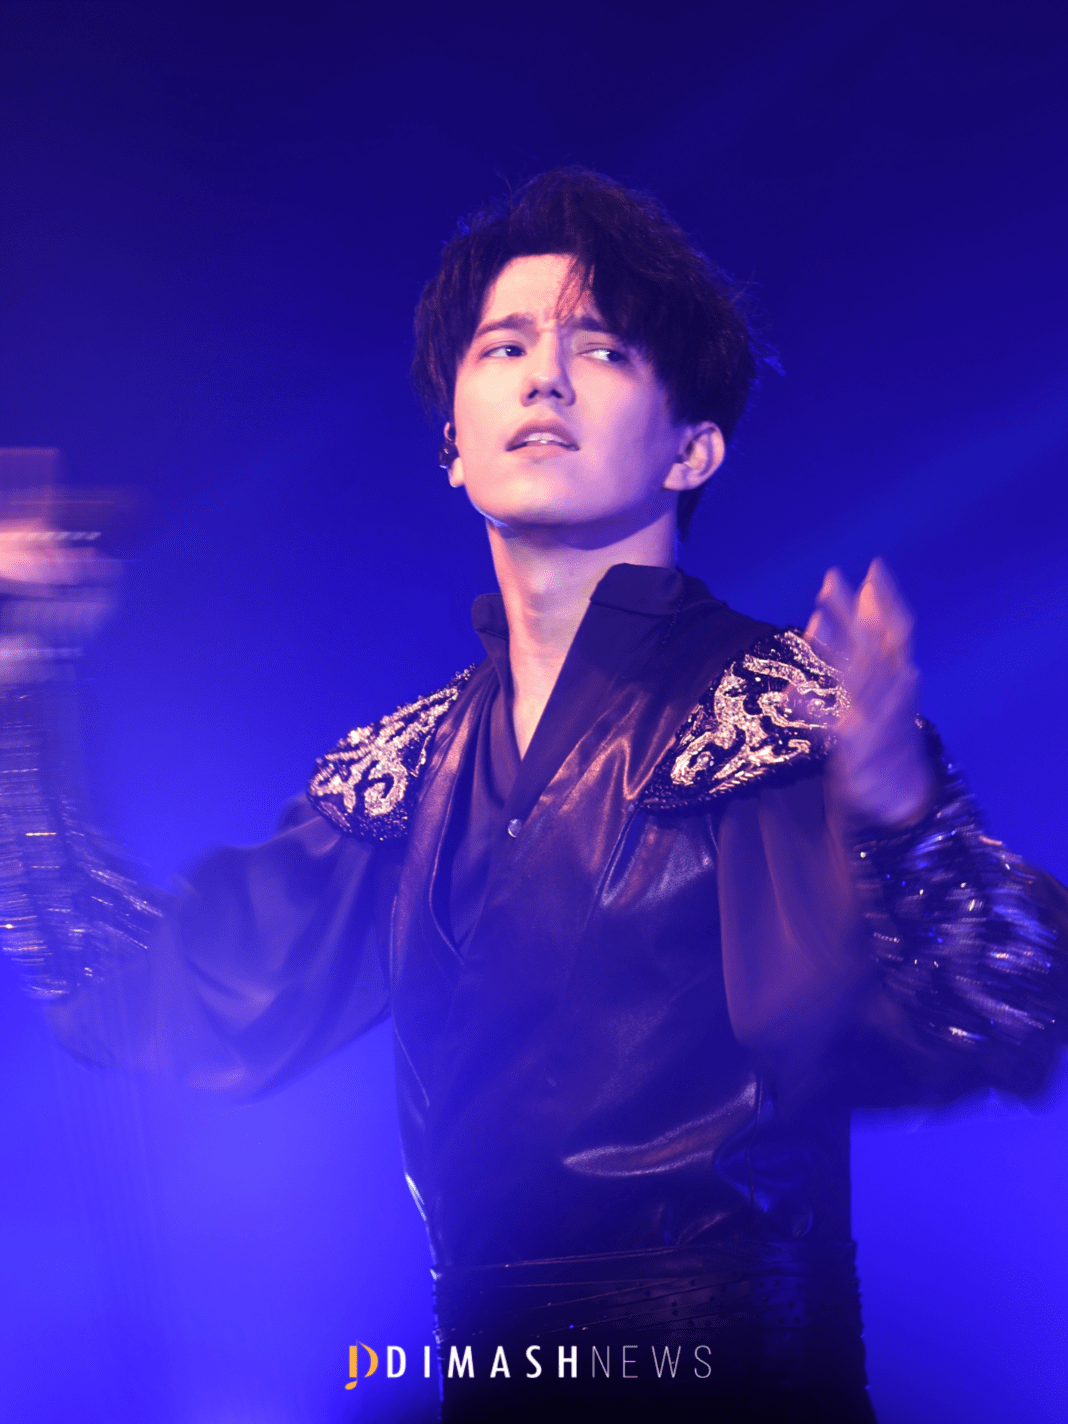 The national Turkish musical instrument was given to Dimash in Antalya